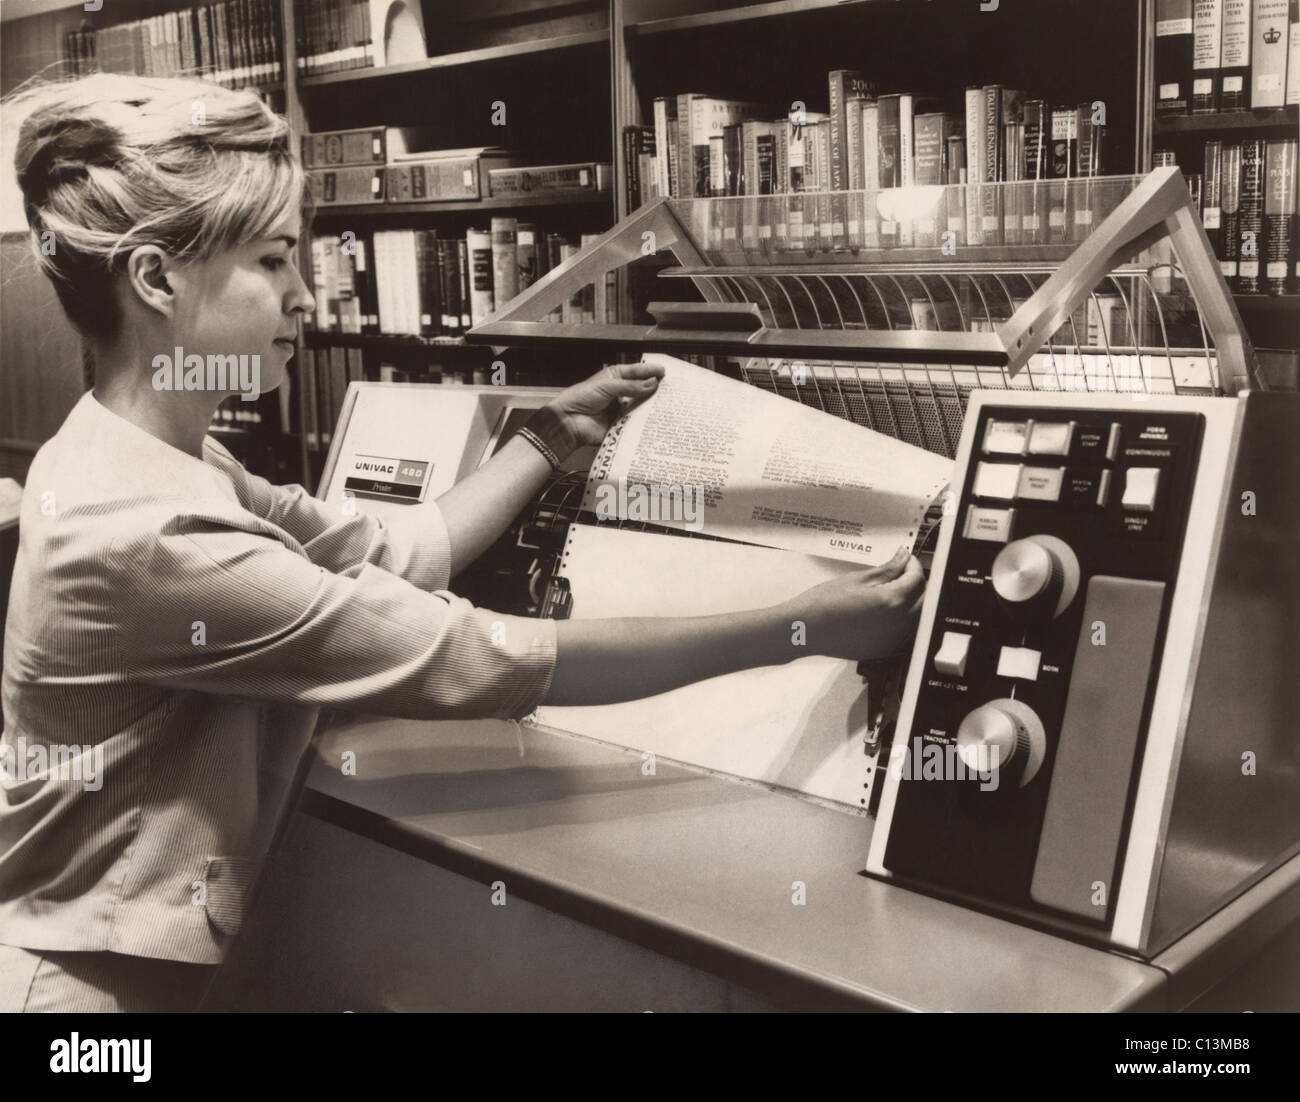 Librarian taking a printout from a UNIVAC 490 Printer. In the 1960s computer technology was available for specialists in this case to manage library catalogs and book circulation. 1966. Stock Photo